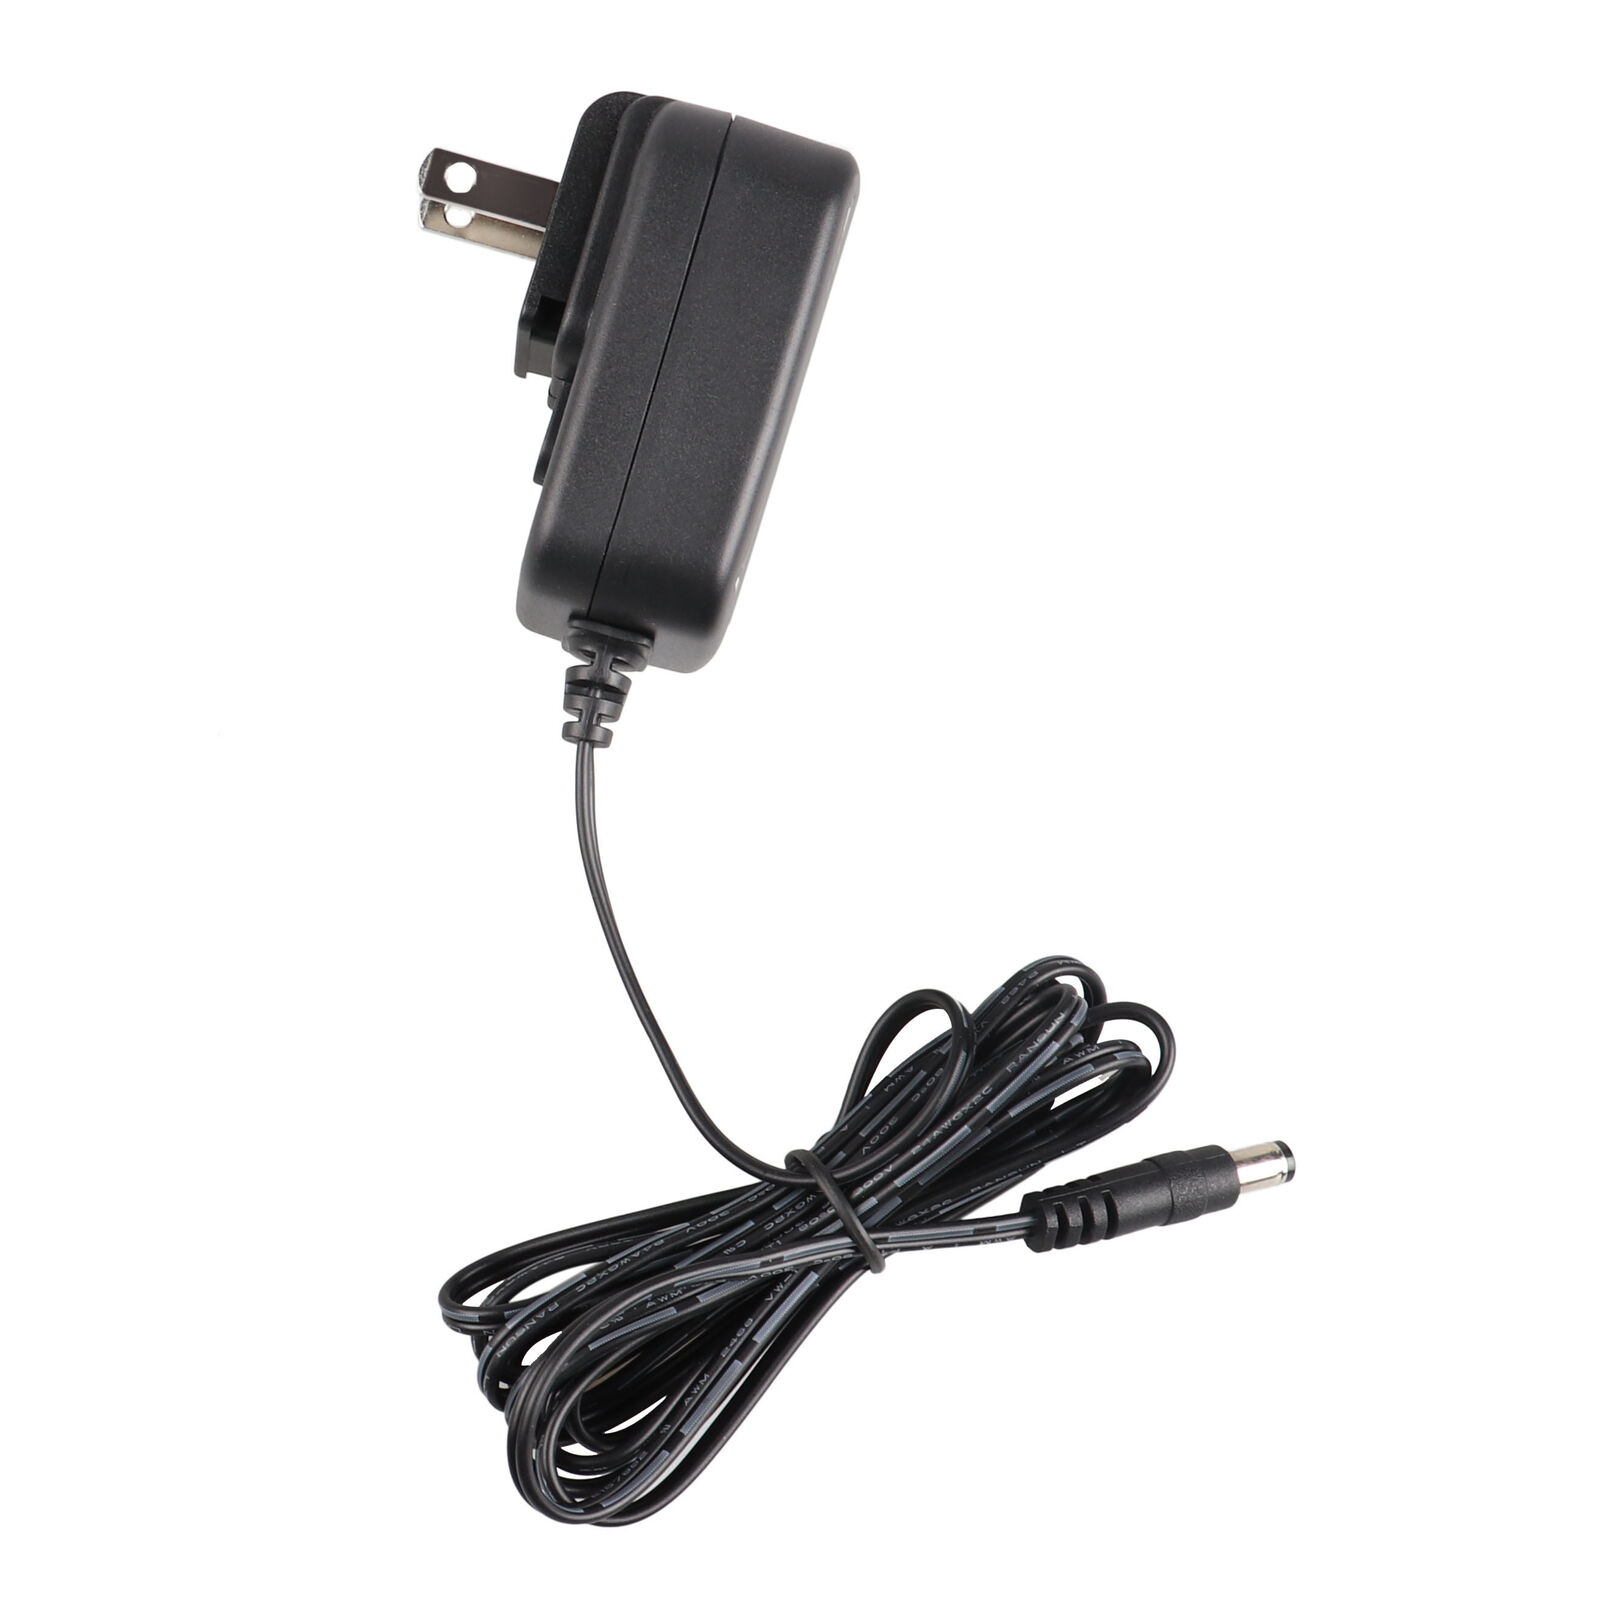 AC Adapter - Power Supply for Xterra SB2.5 & SB2.5r Recumbent Bike Country/Region of Manufacture China Cable Length: 6.